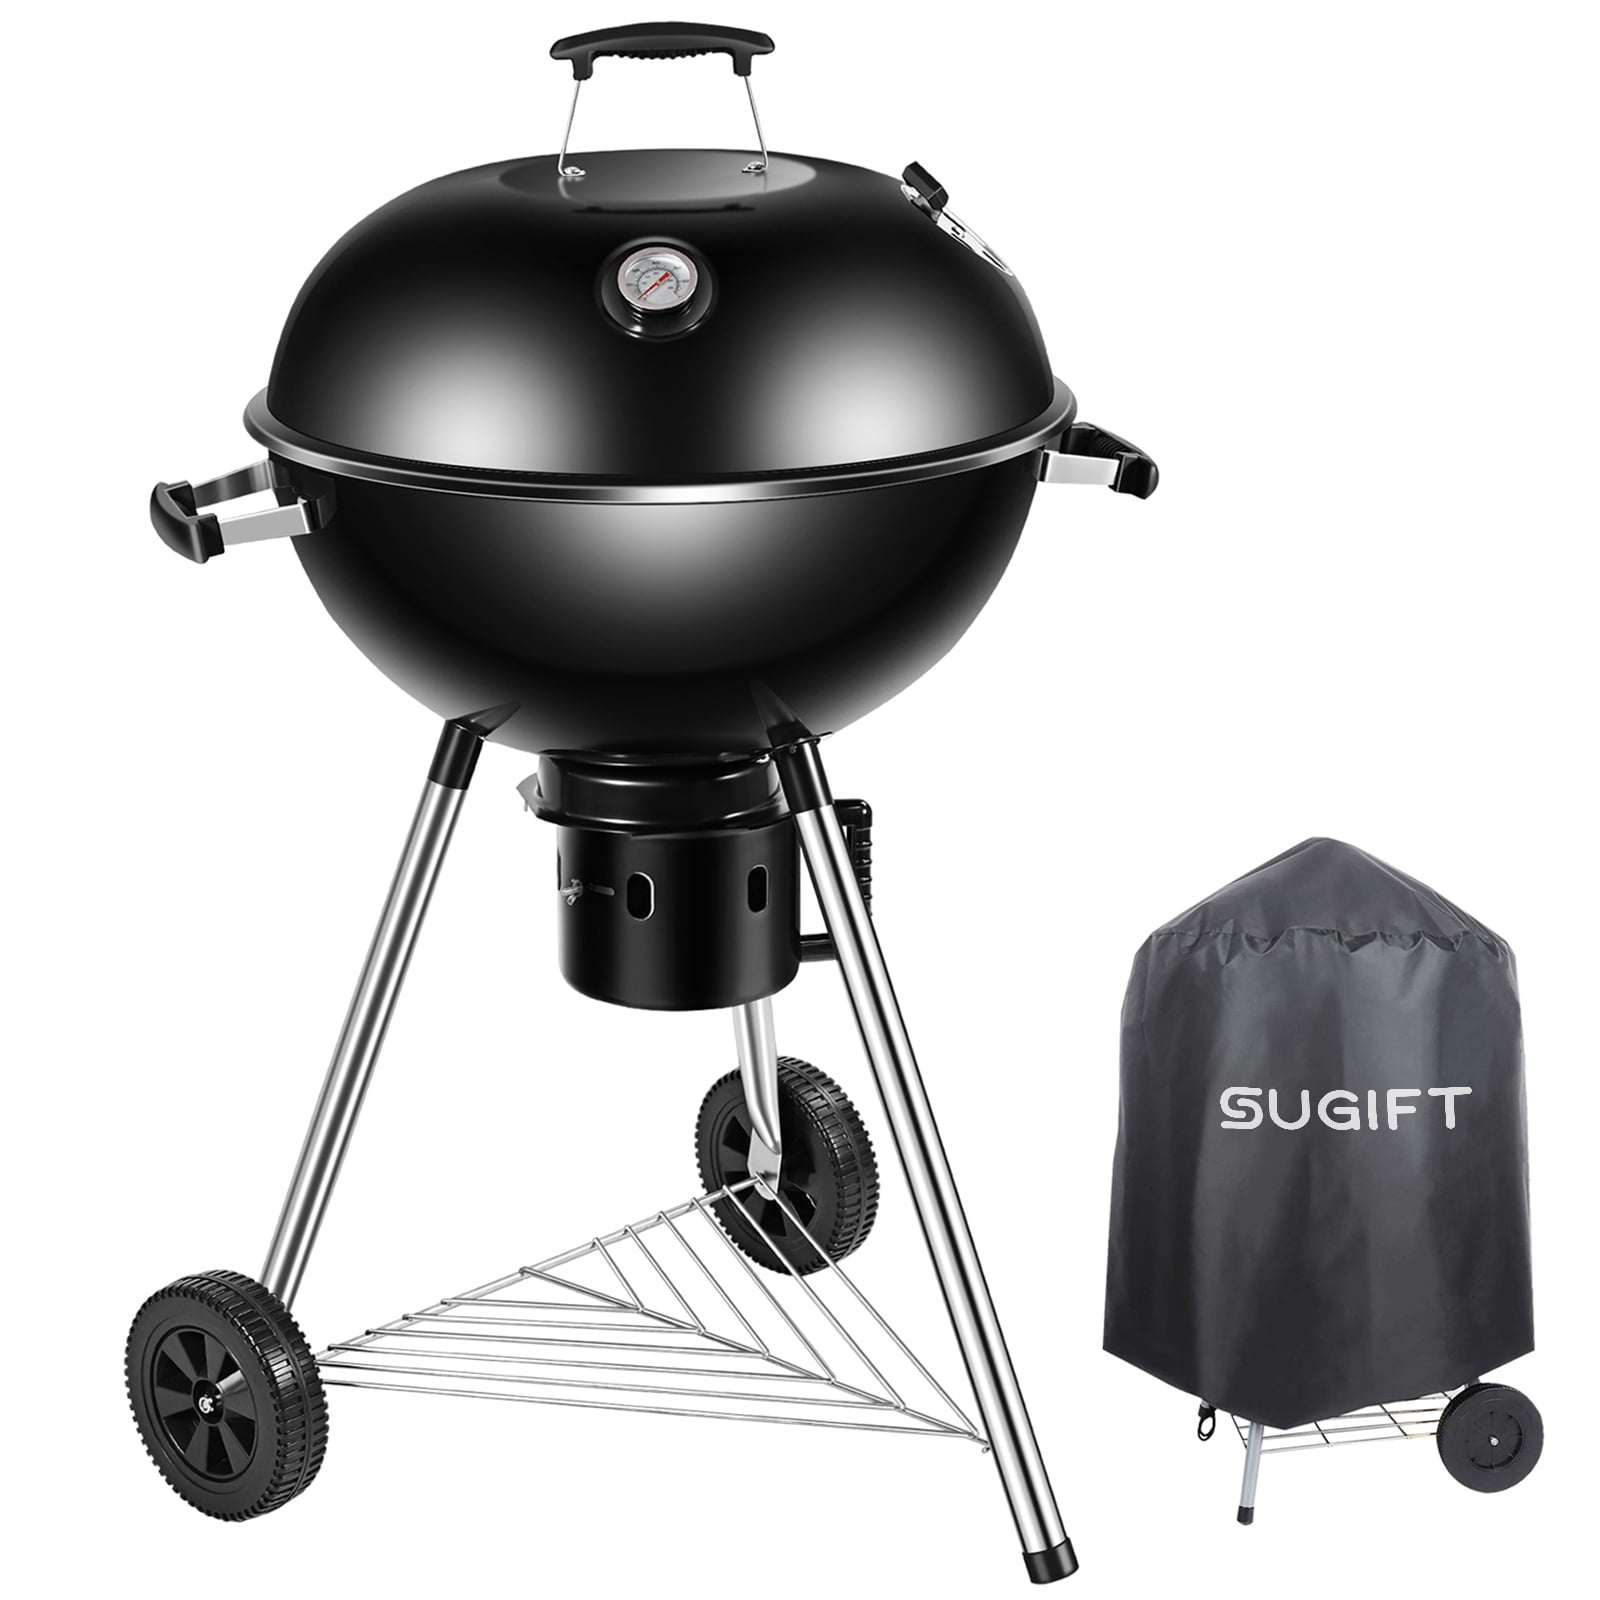 SUGIFT 22″ Portable Premium Charcoal Grill with Cover